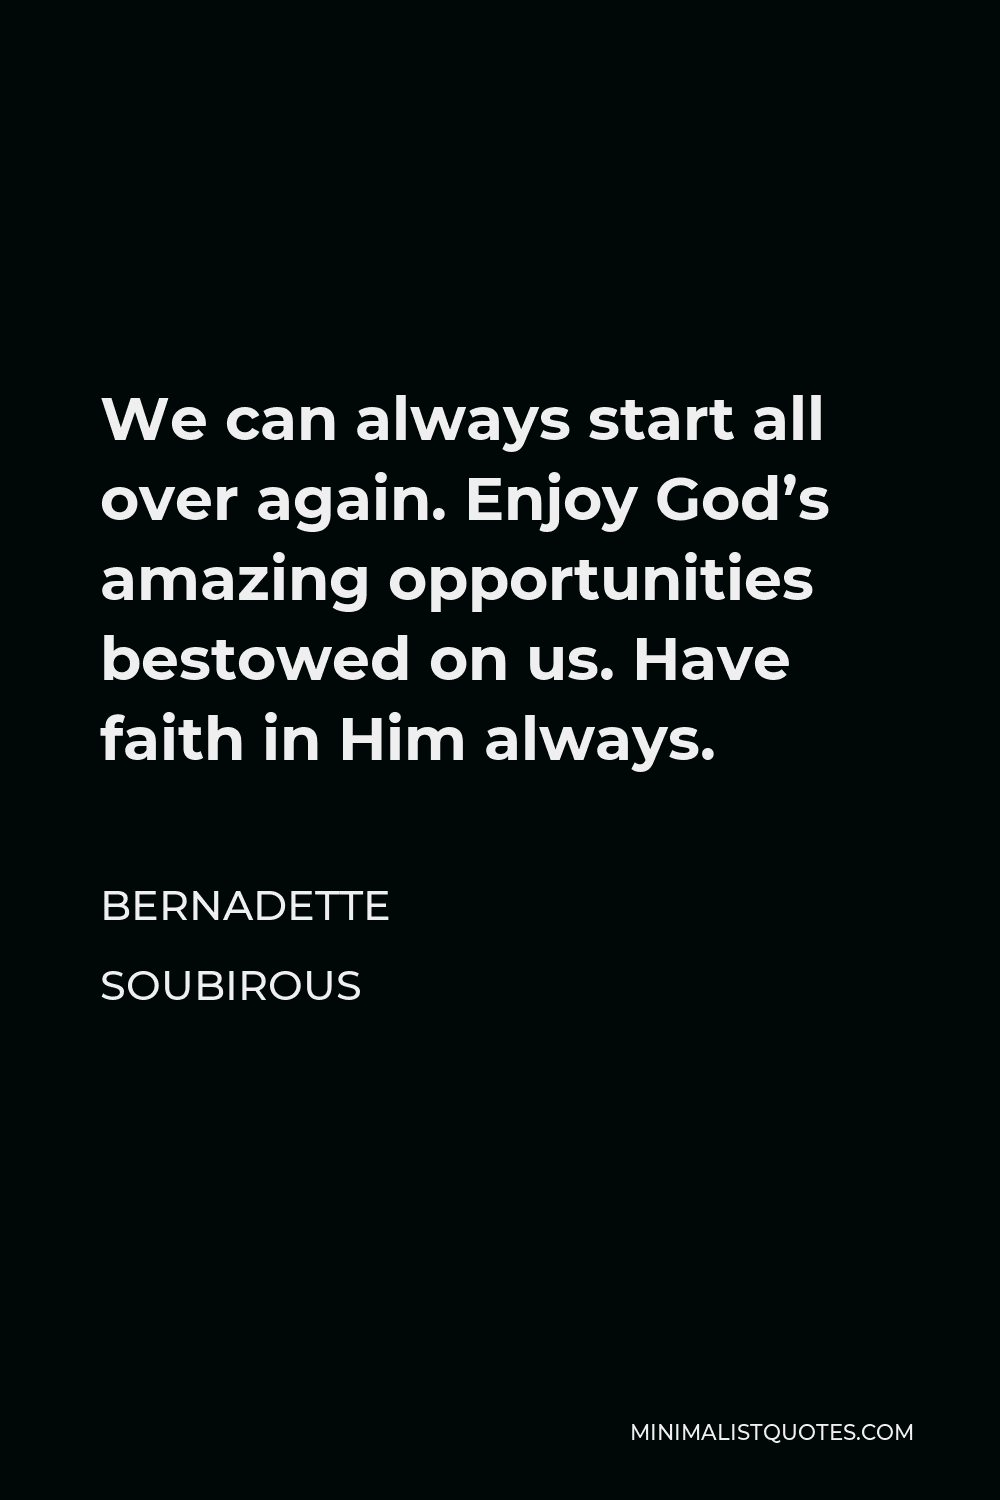 Bernadette Soubirous Quote - We can always start all over again. Enjoy God’s amazing opportunities bestowed on us. Have faith in Him always.